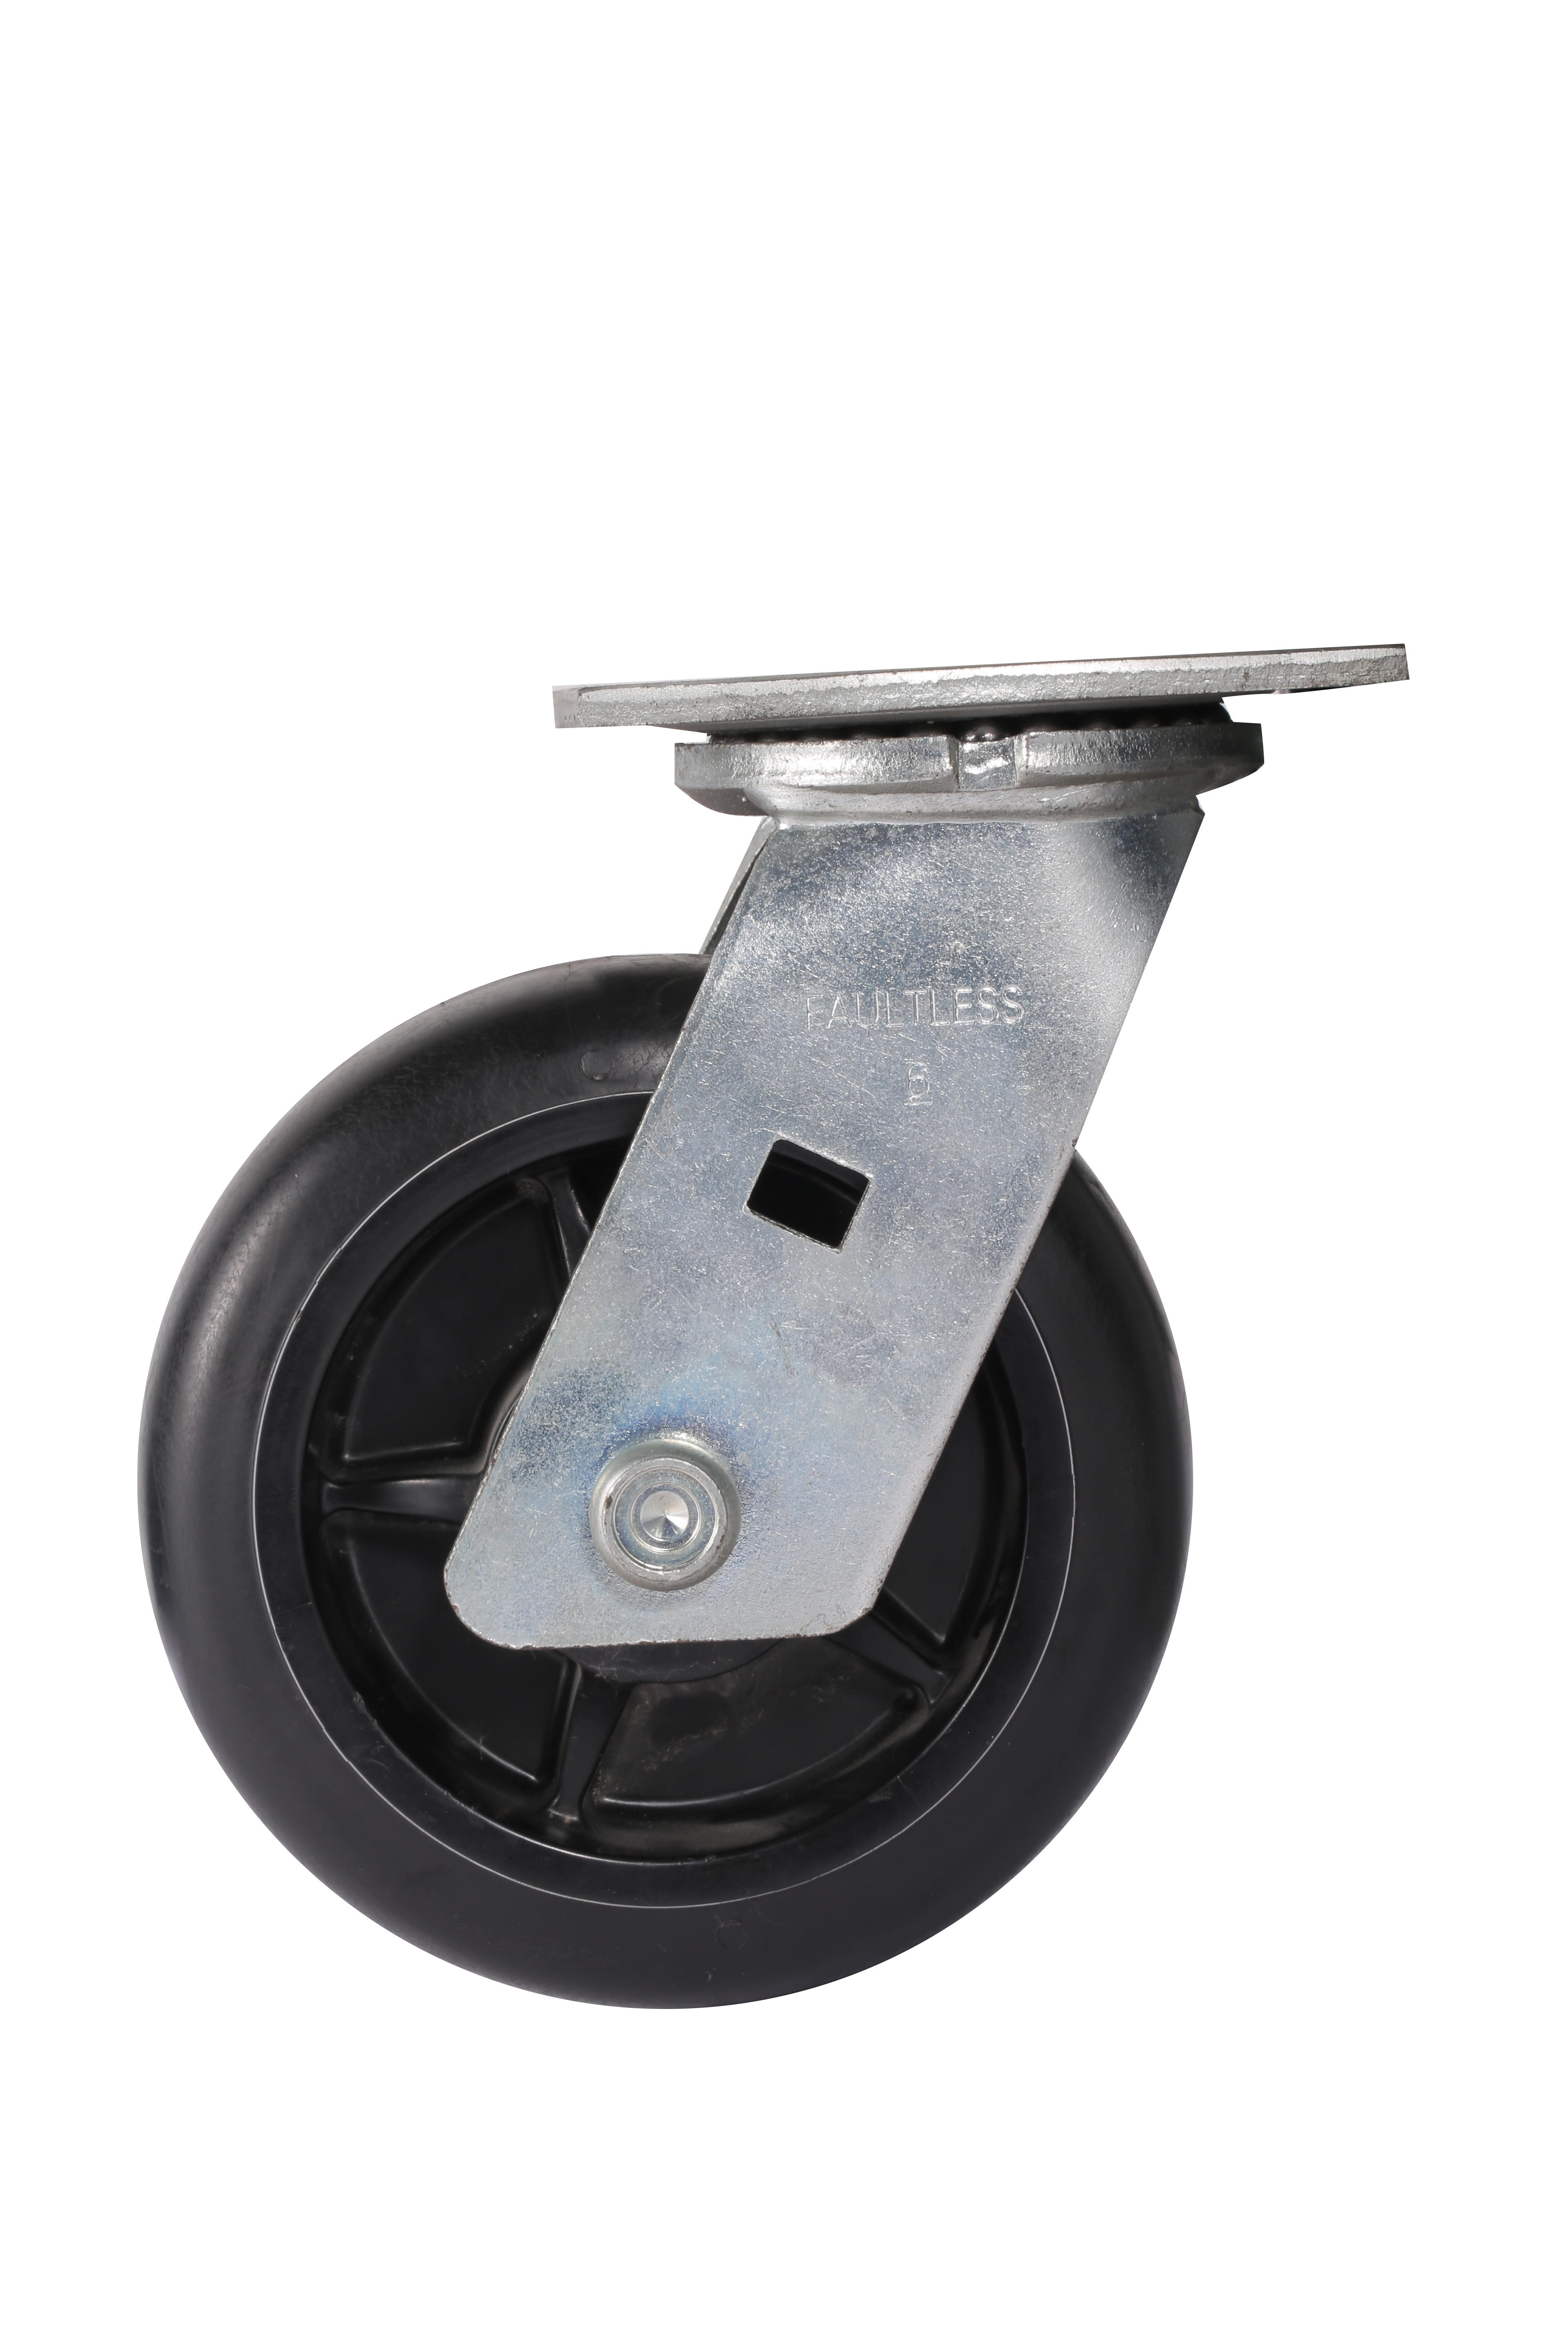 5”heavy duty stainless steel directional casters industrial wheel 